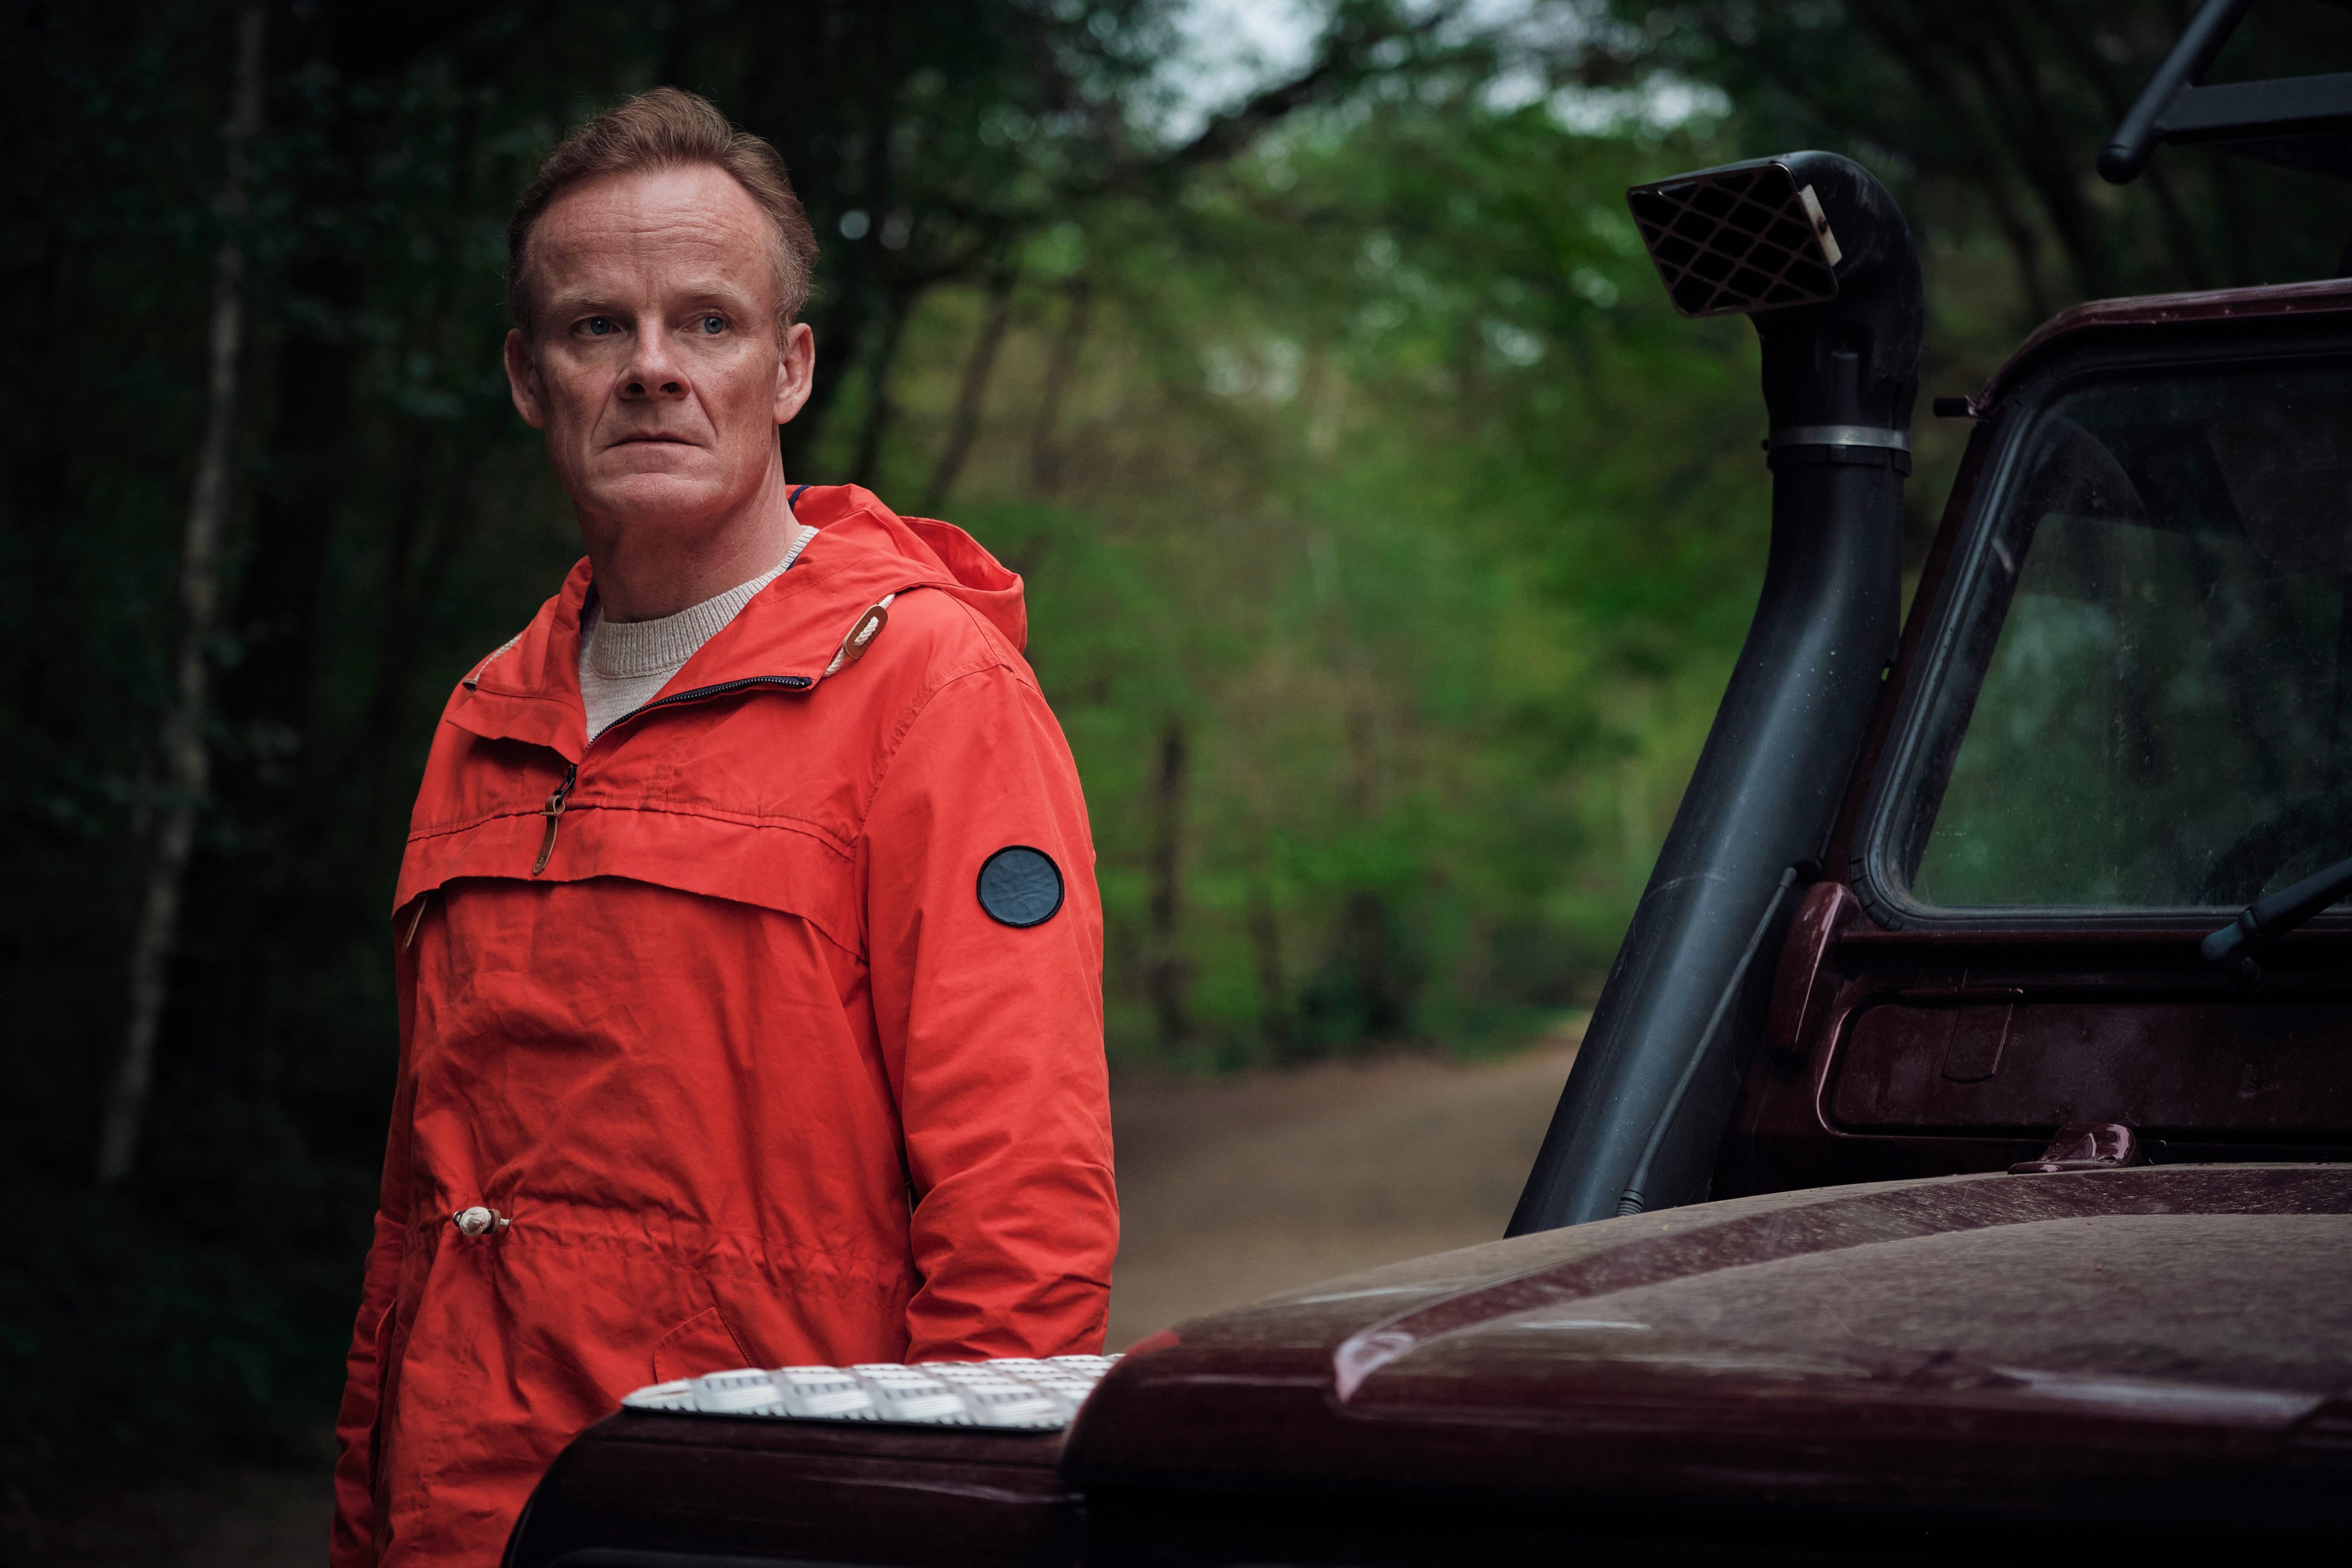 Con man Robert Chance (played by Alistair Petrie, above) has returned after vanishing for 15 years, and a previous victim (played by Rebekah Staton) is going after him, in BBC First’s The Following Events are Based on a Pack of Lies. Photo: Sister BBC / BBC Studios